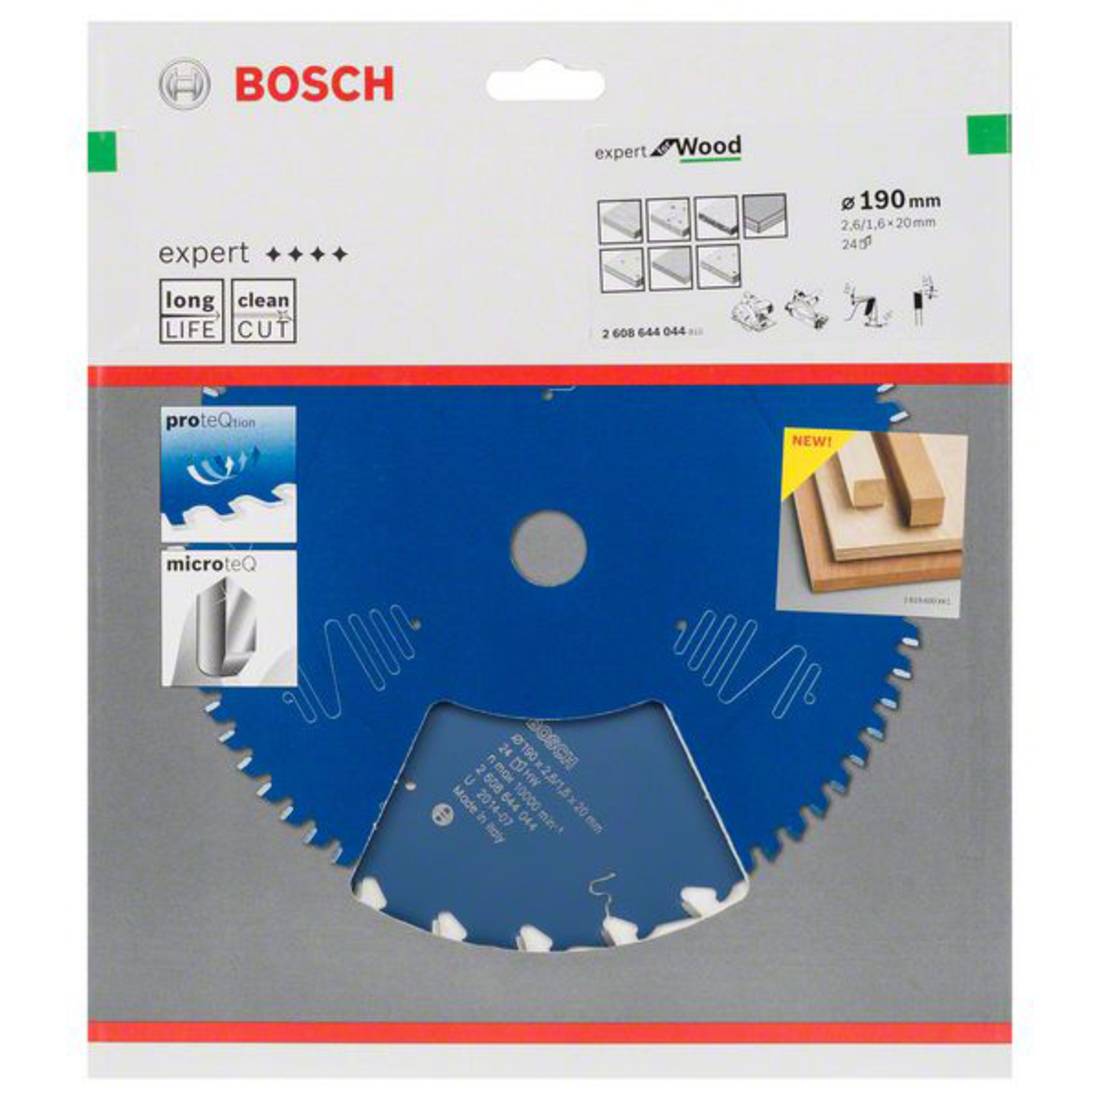 Bosch Expert Circular Saw Blade for Wood 190 x 20 x 2,6 mm, 24 2608644044 Power Tool Services